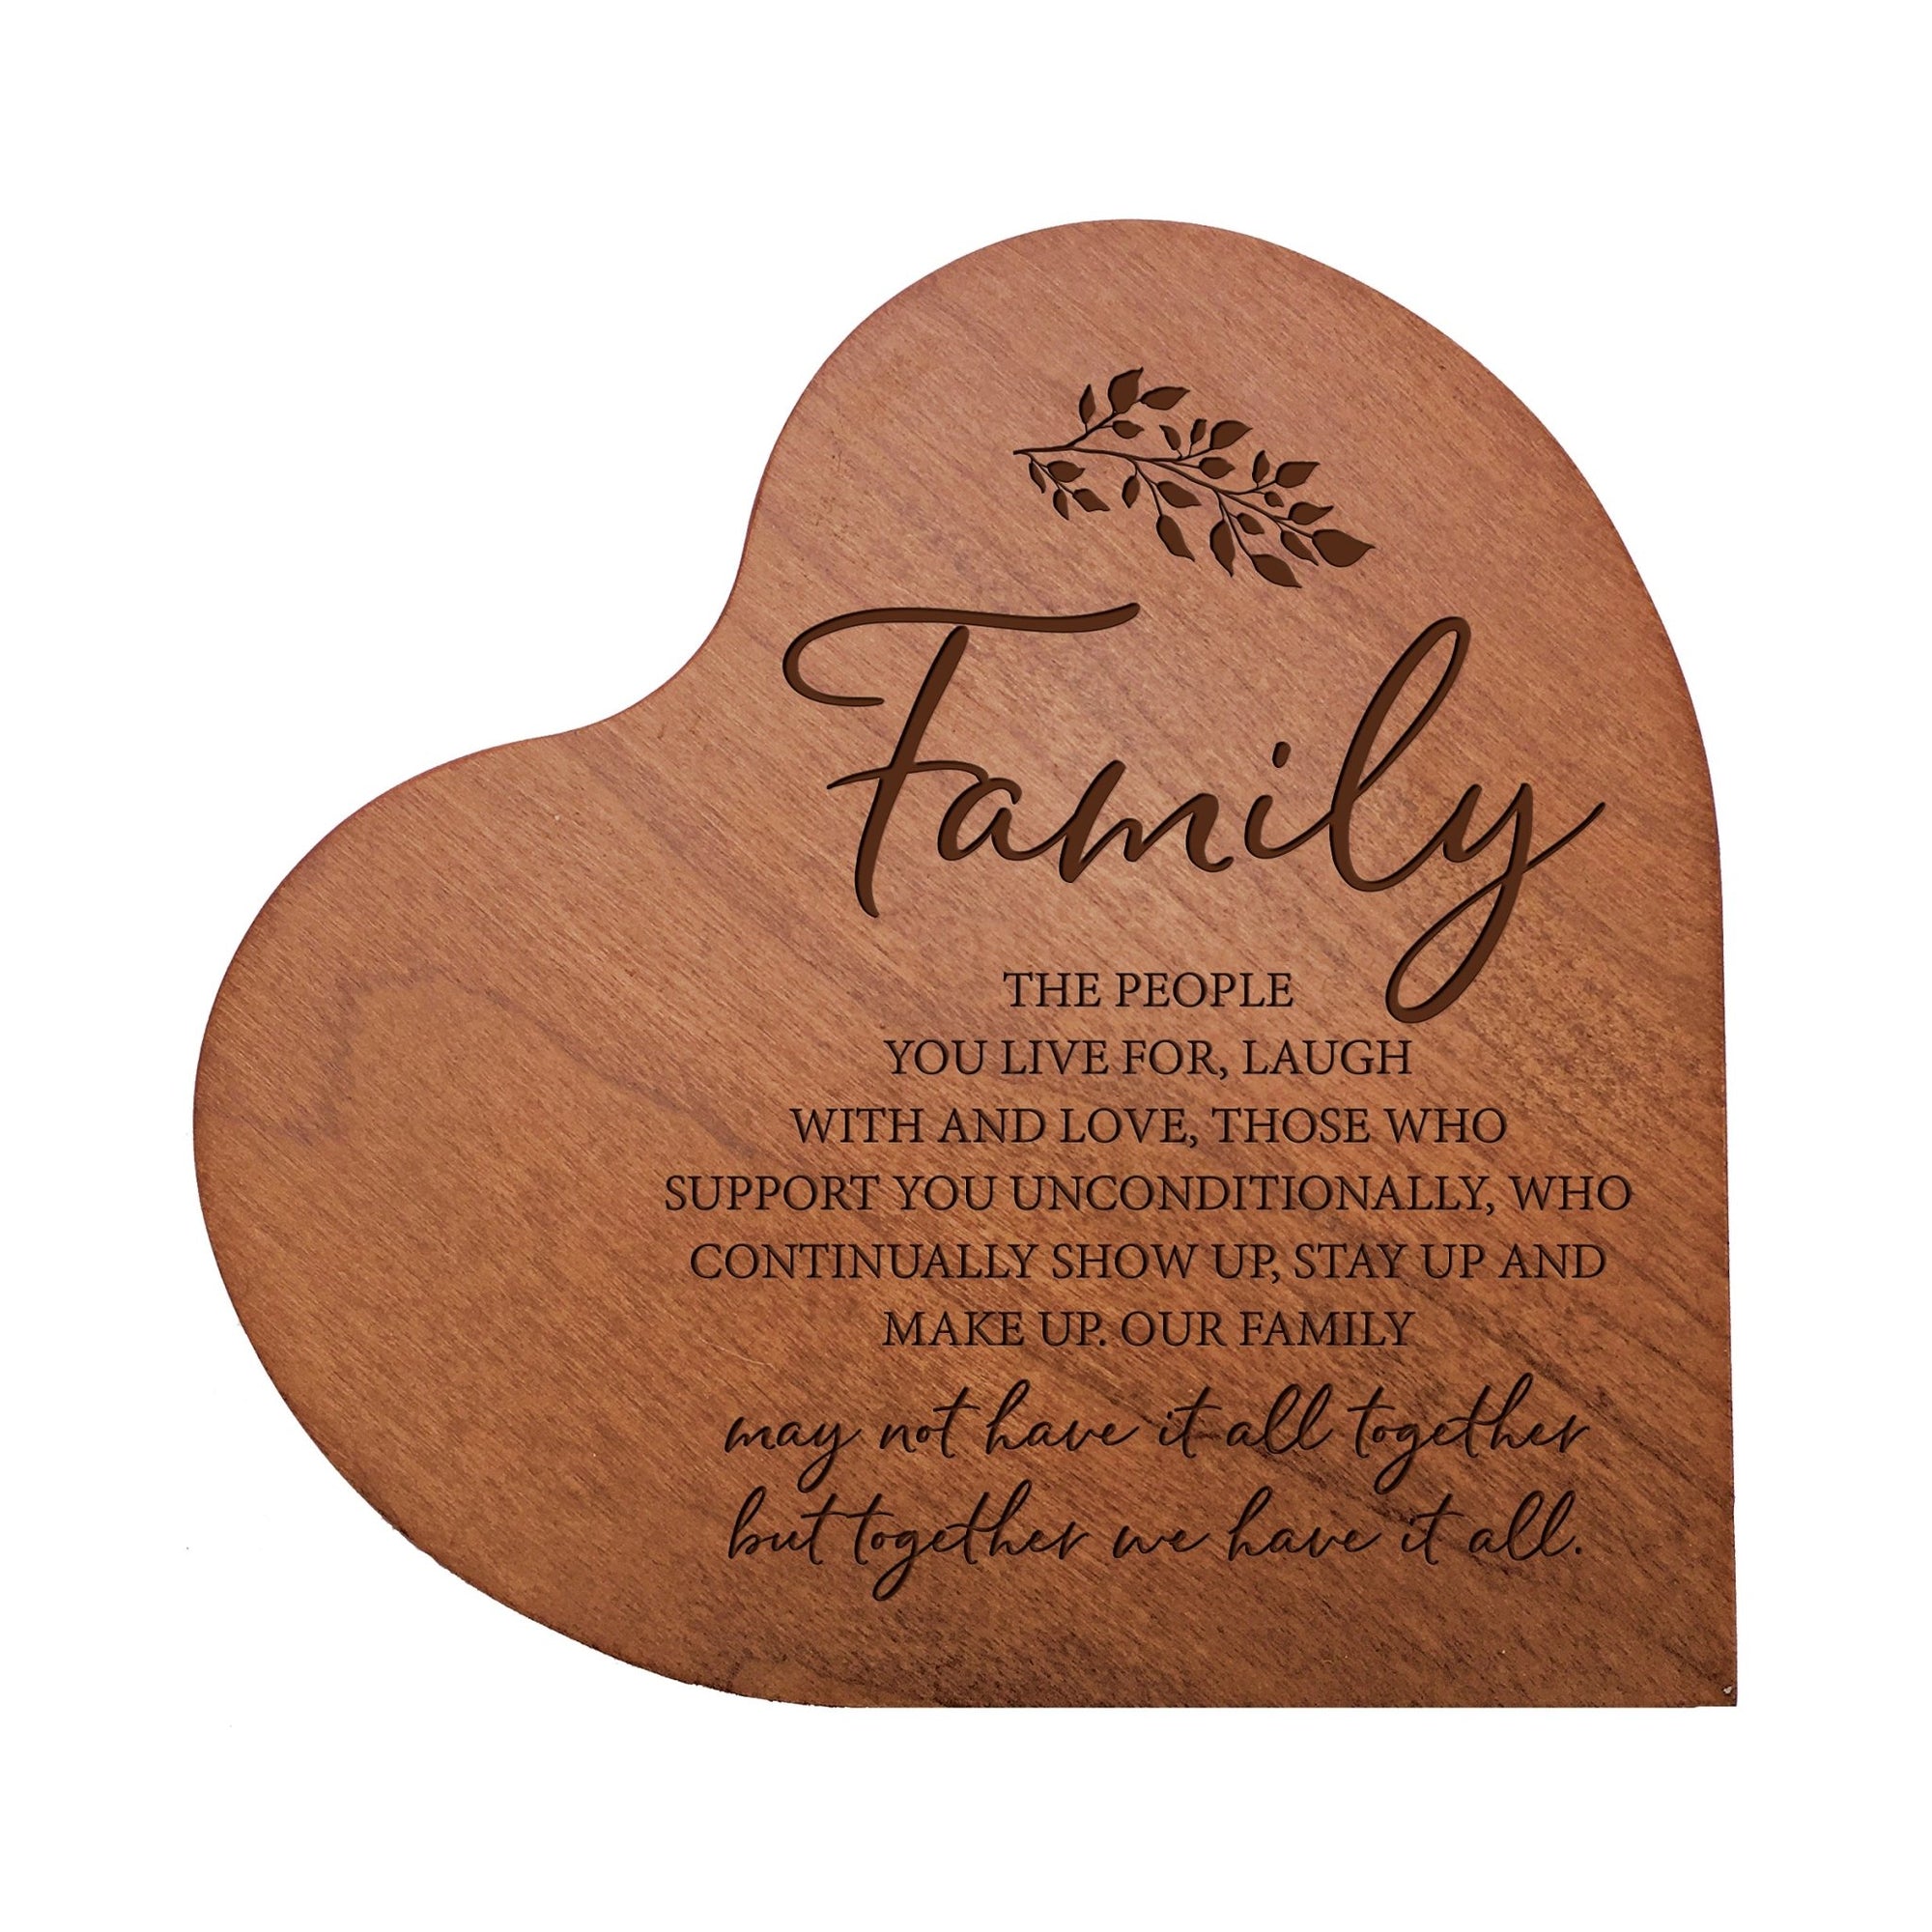 Engraved Wooden Inspirational Heart Block 5” x 5.25” x 0.75” - The People You Live For - LifeSong Milestones